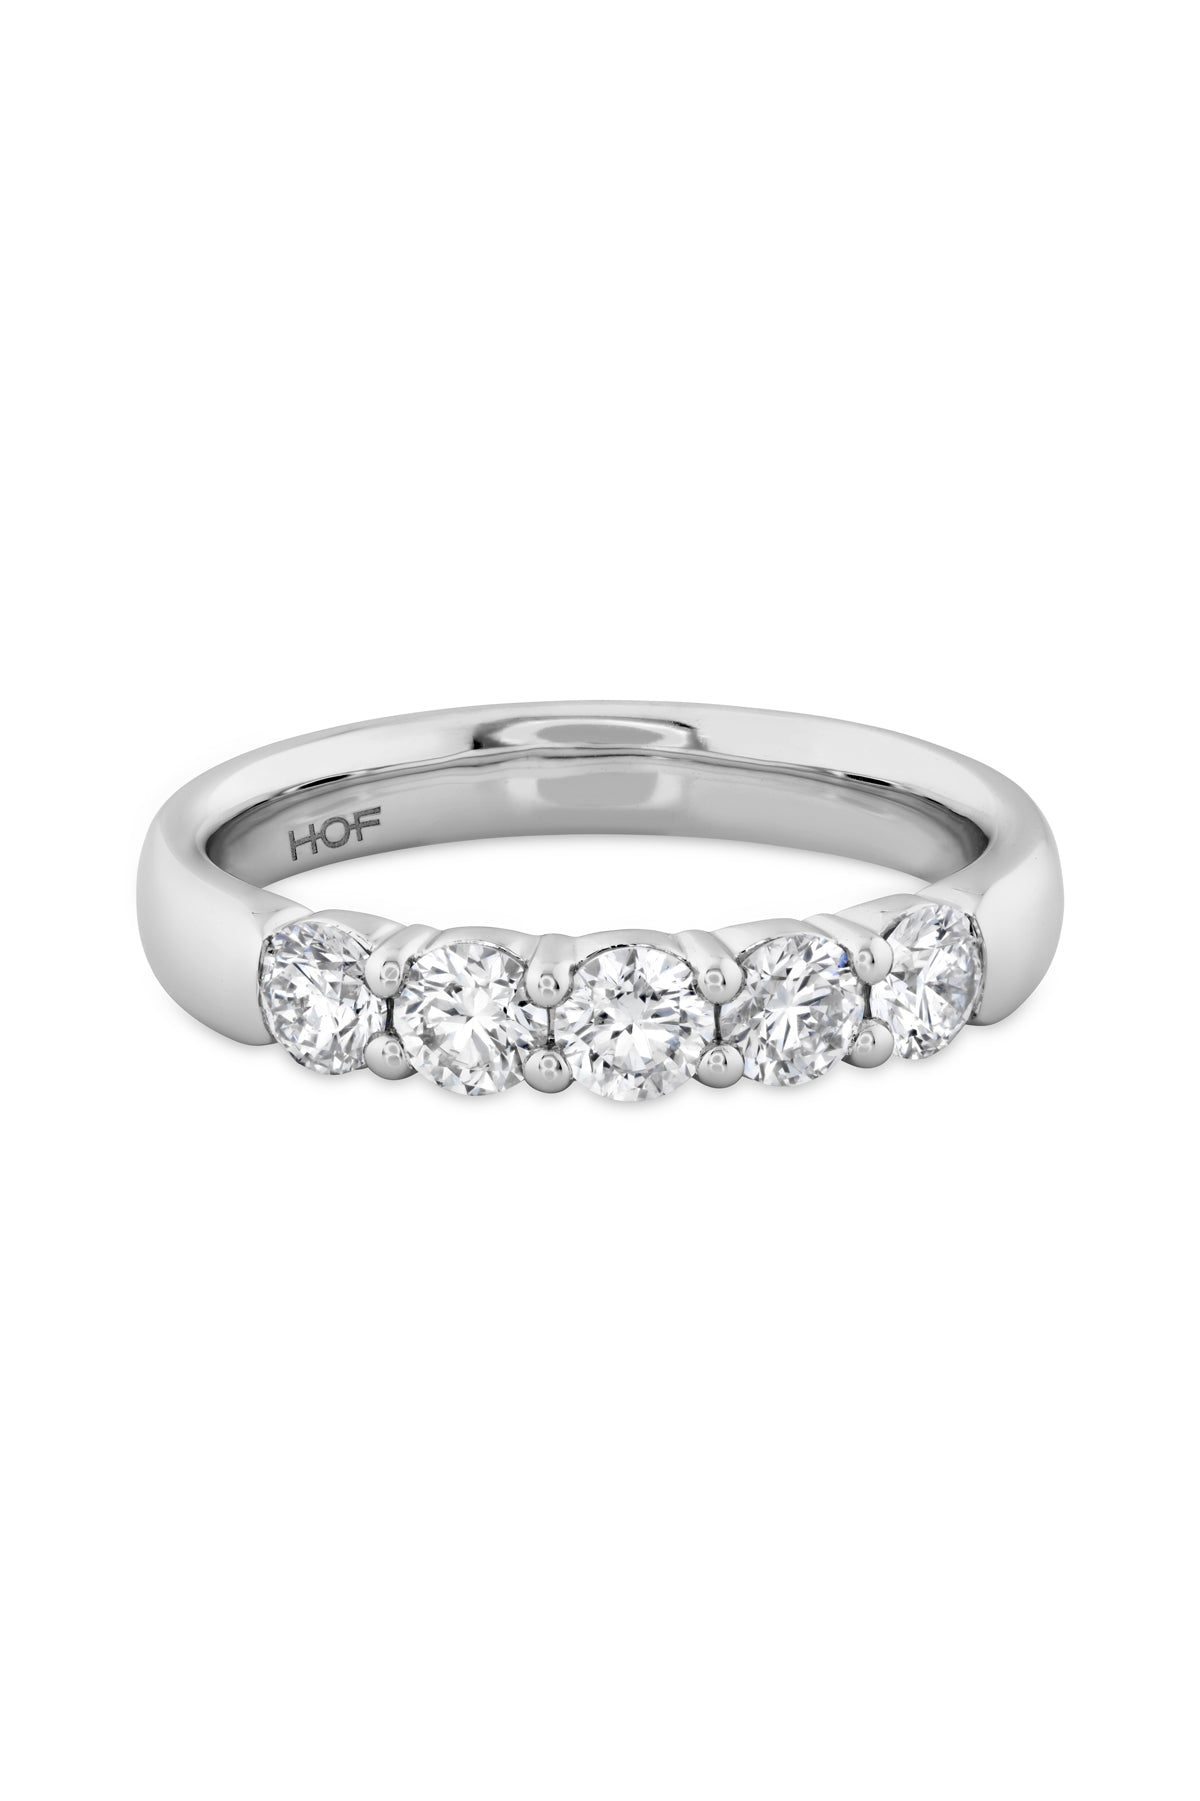 Signature 5 Stone Band From Hearts On Fire available at LeGassick Diamonds and Jewellery Gold Coast, Australia